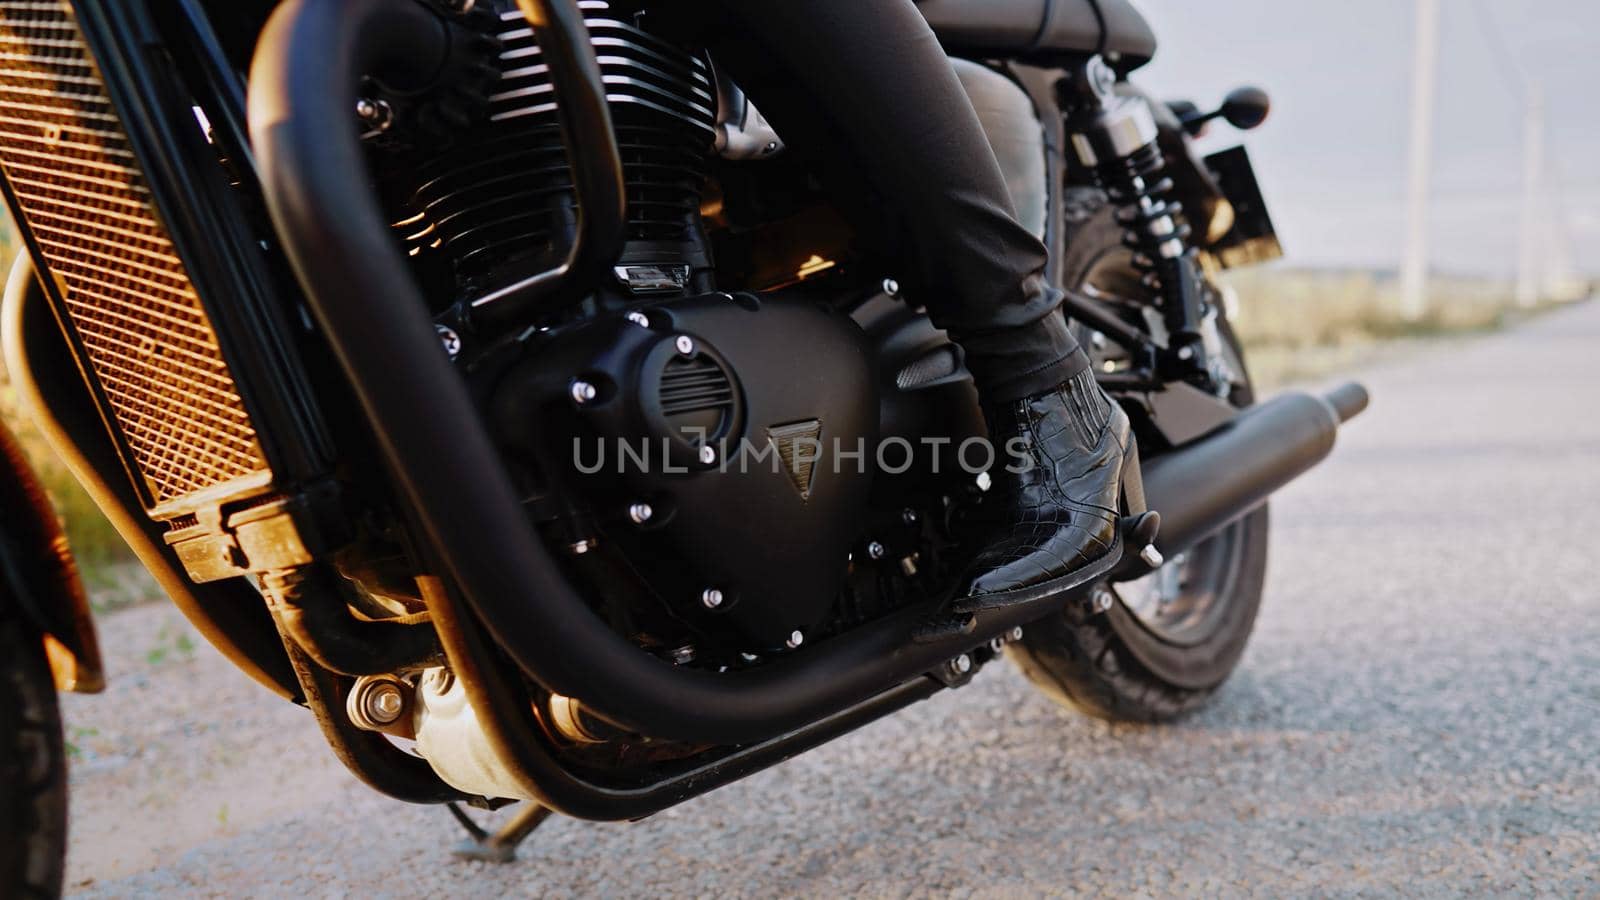 Legs of stylish motorcyclist woman sitting on classic bike. Black retro-styled motorcycle. Details of vintage design of brand-new motorbike. Sun flare, outdoor. High quality photo